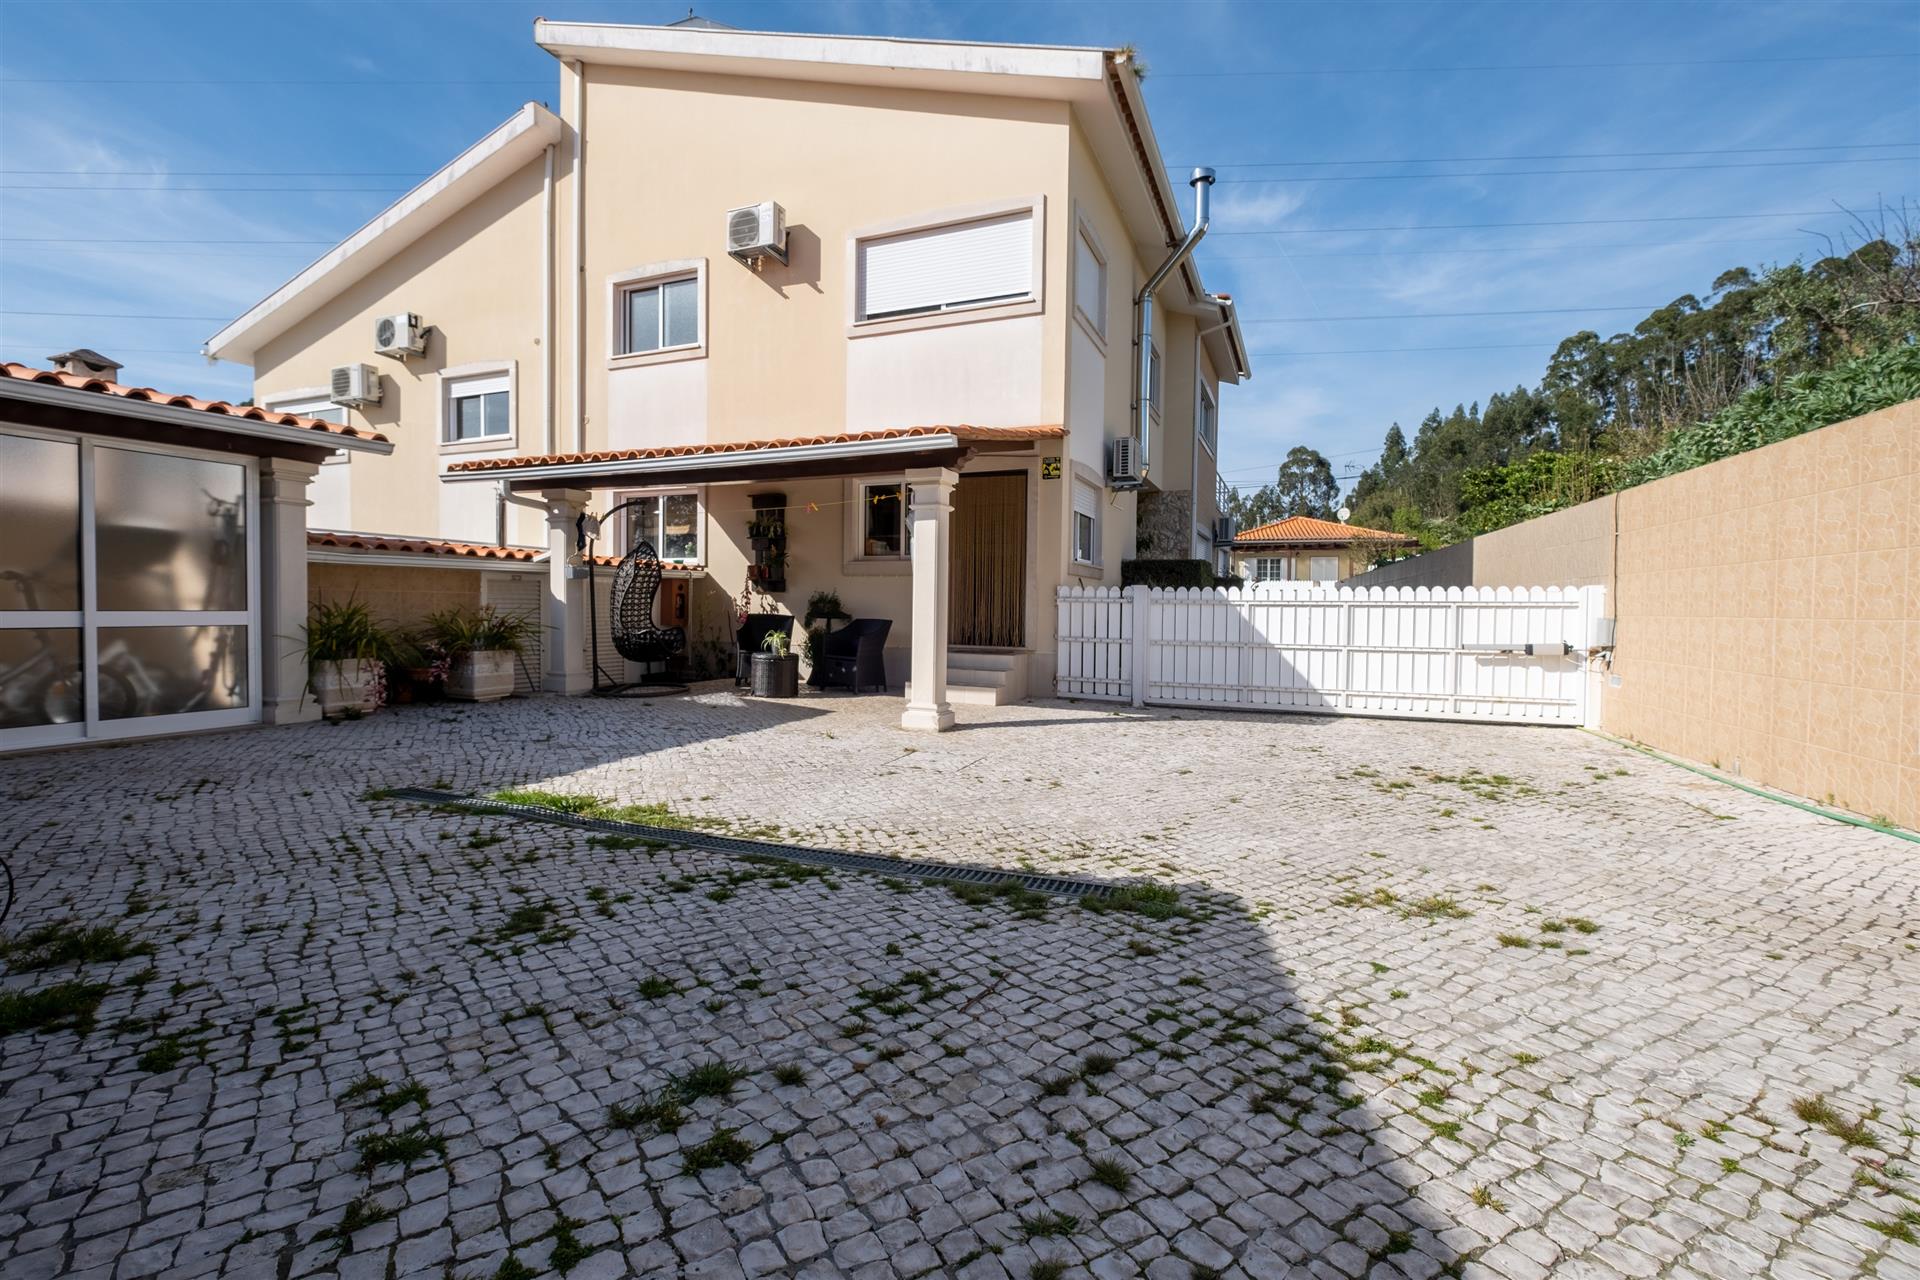 Fantastic 5 bedroom semi-detached house for sale in Antanhol, Coimbra